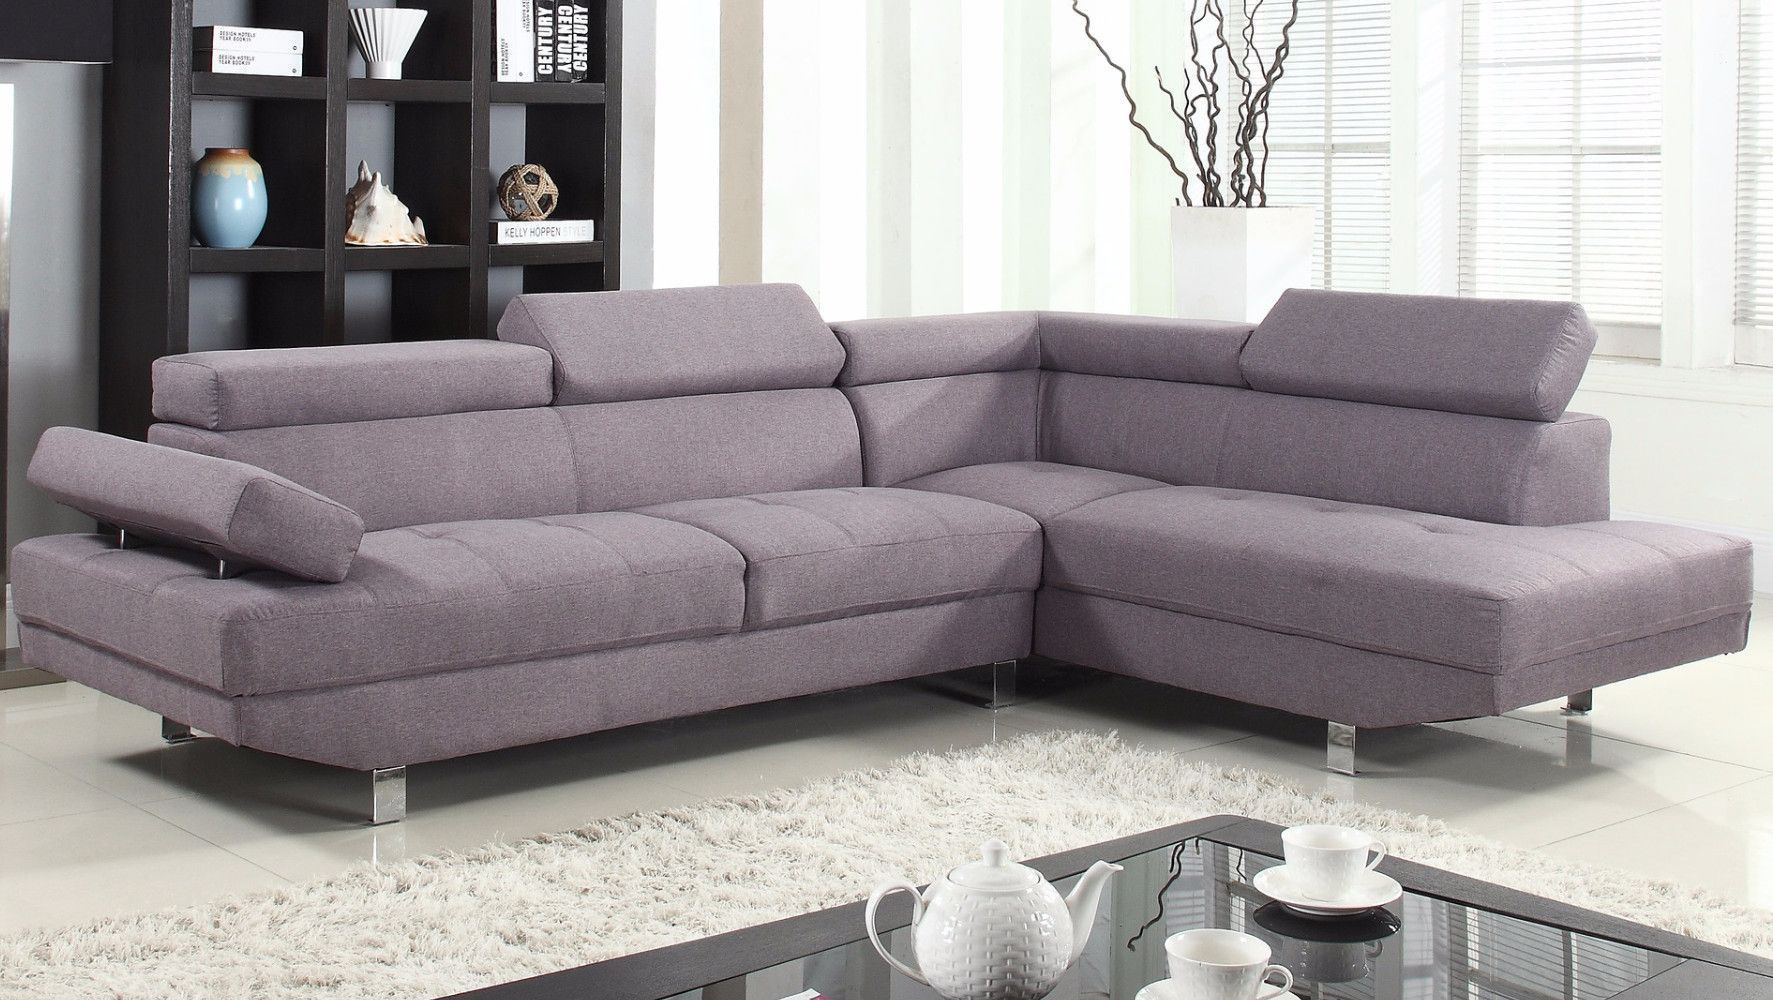 2 Piece Modern Linen Fabric Right Facing Chaise Sectional In 2pc Burland Contemporary Chaise Sectional Sofas (View 2 of 15)